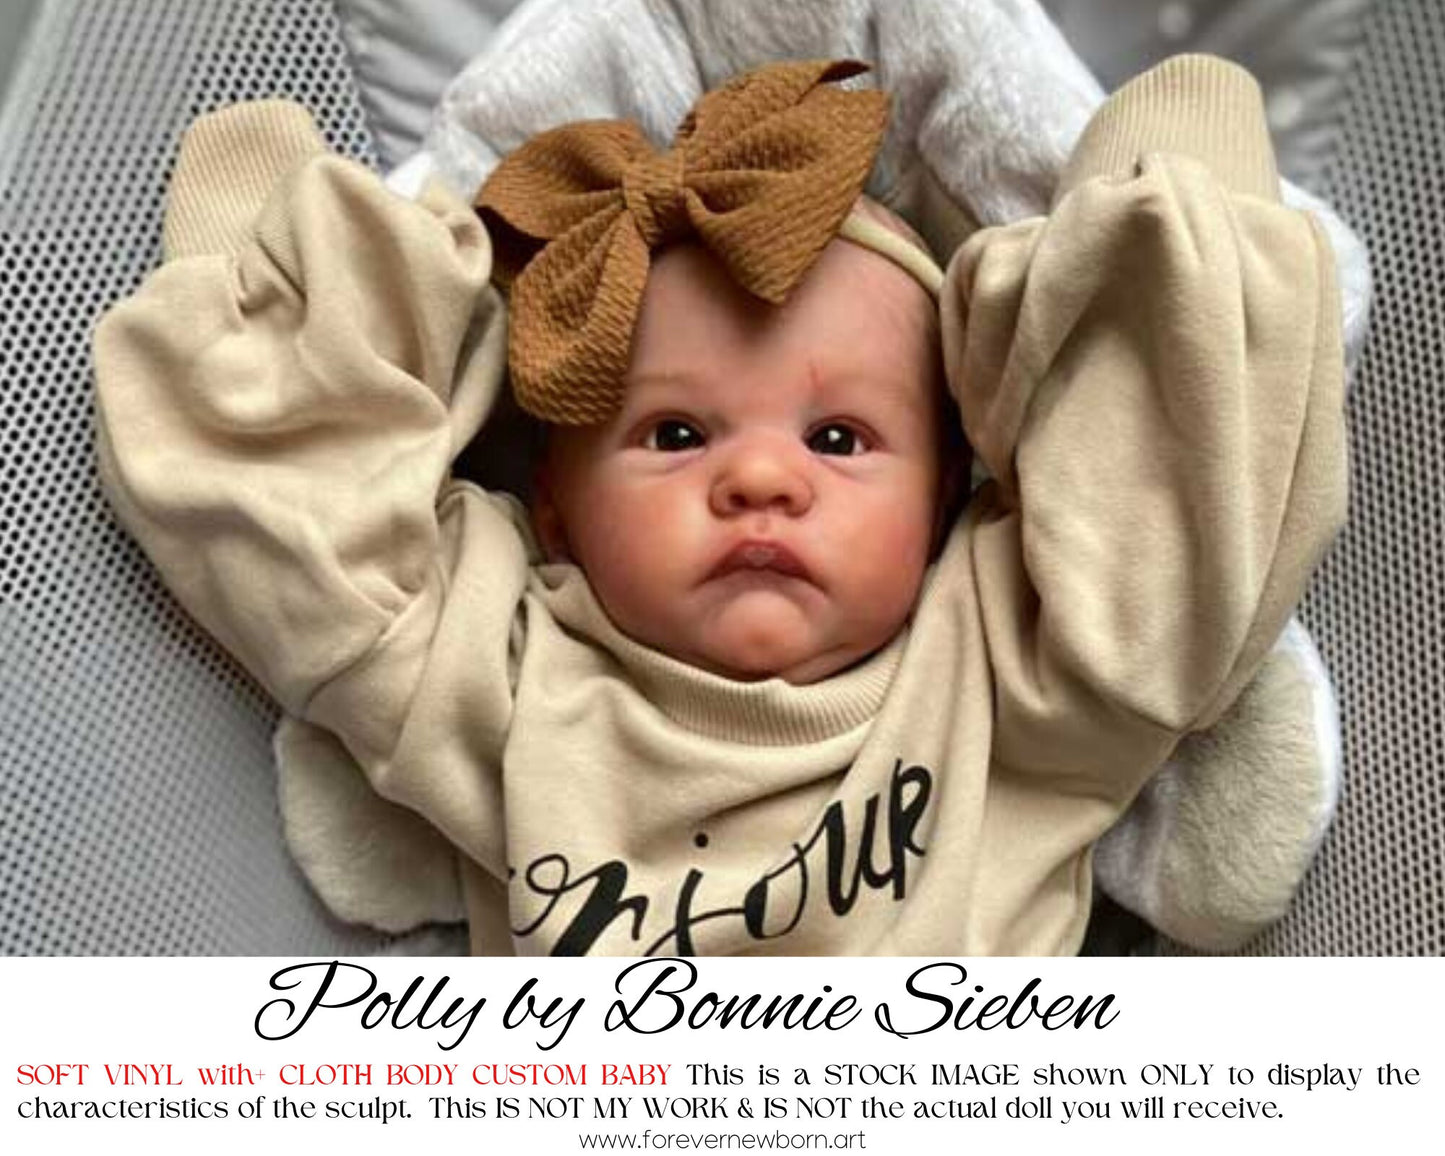 Ultra-Realistic ReBoRn BaBy ~ Reborn Baby Polly by Bonnie Sieben **Examples Of My Work Included (19" Full Limbs)